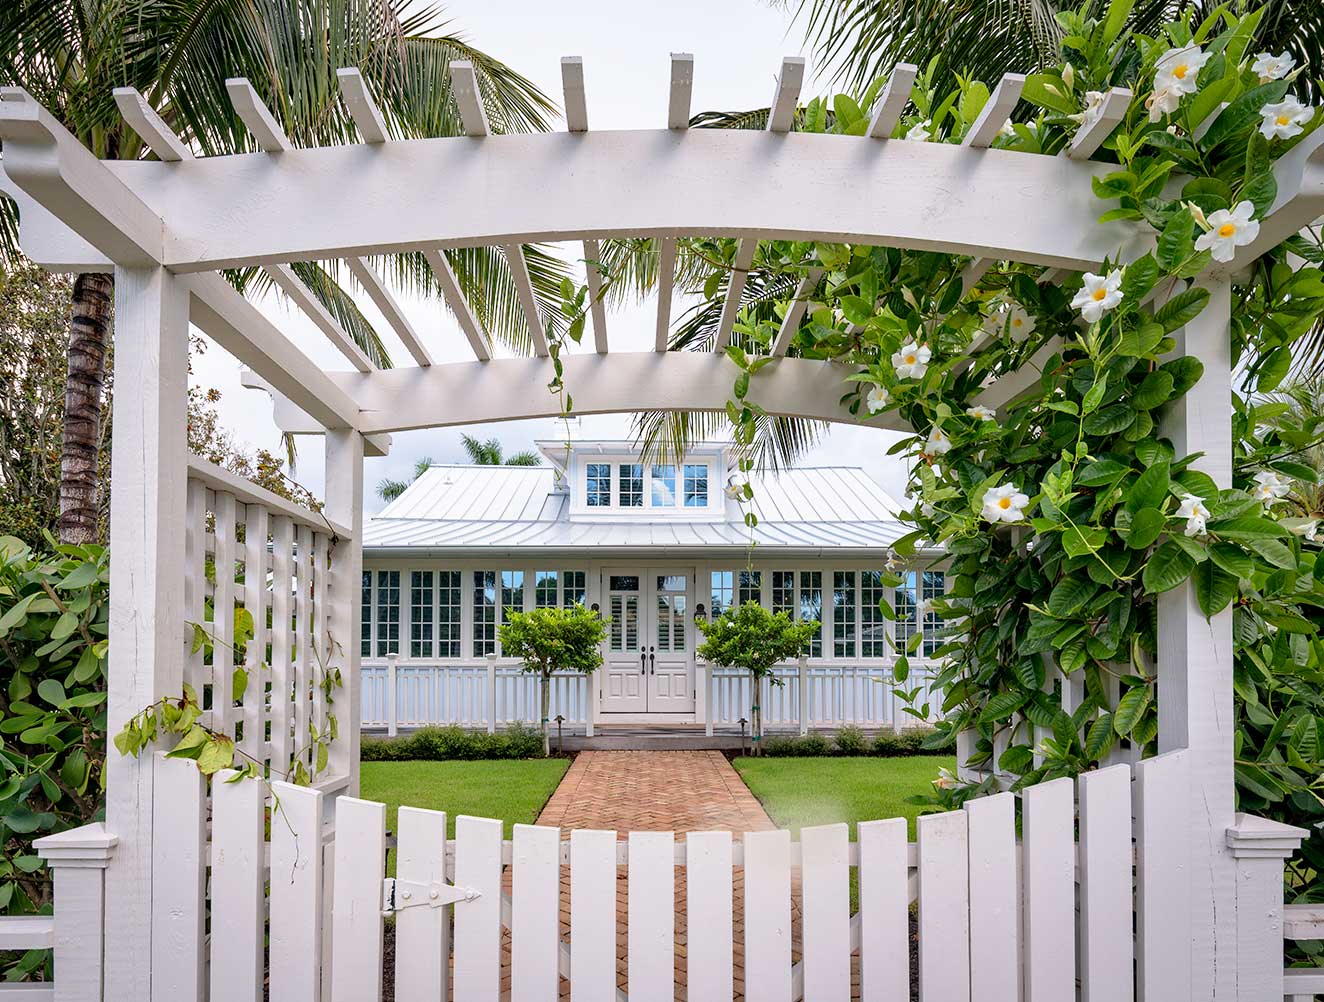 Garden entrance of Key West style home in Naples, Florida.